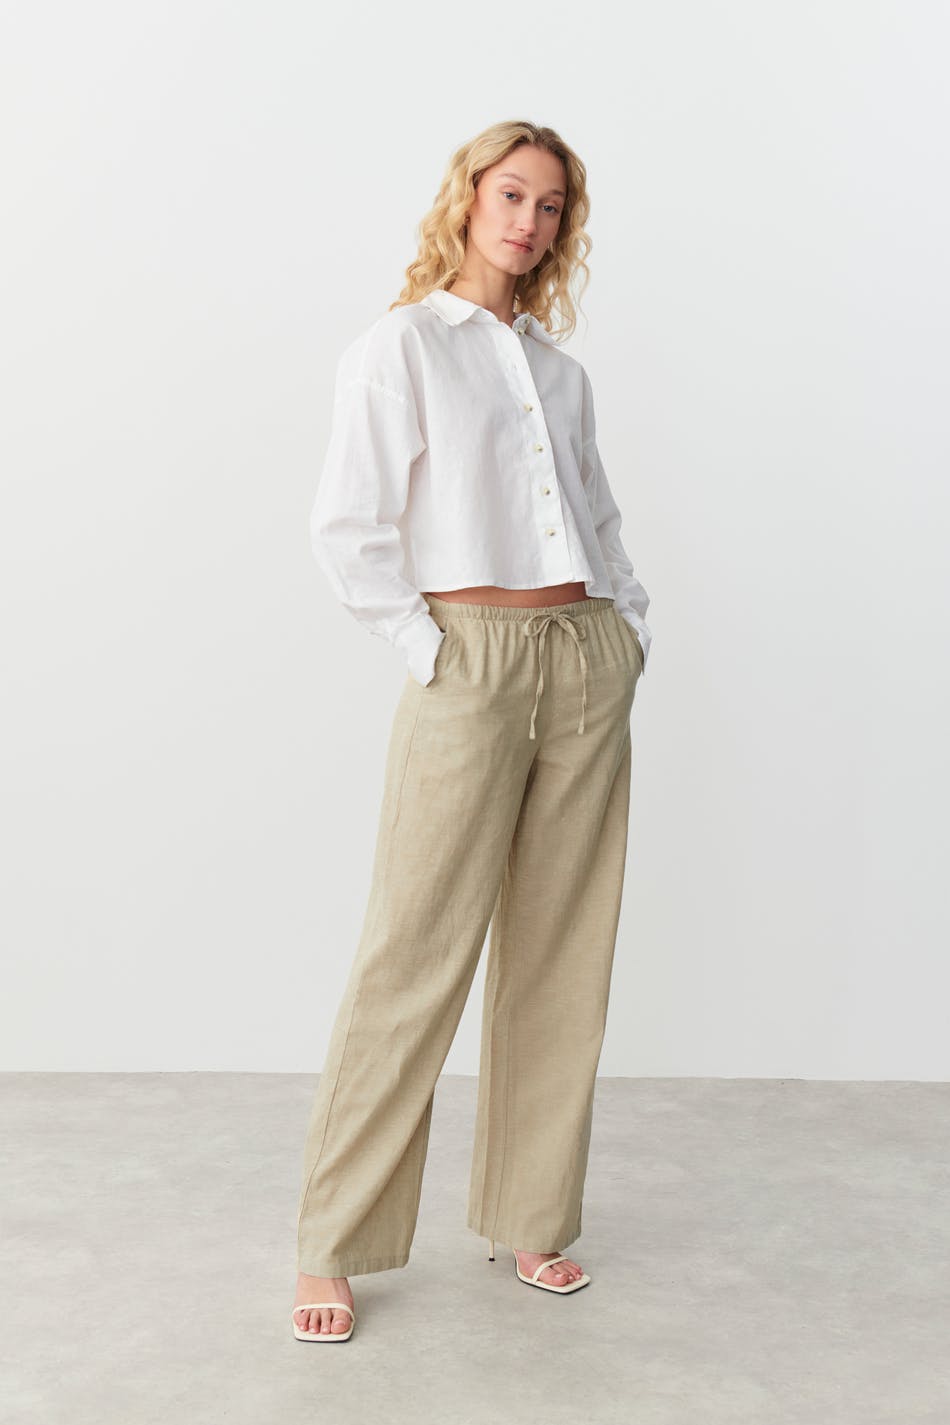 HOW TO STYLE LINEN TROUSERS & LINEN SHIRTS FOR SUMMER - My name is Lovely!